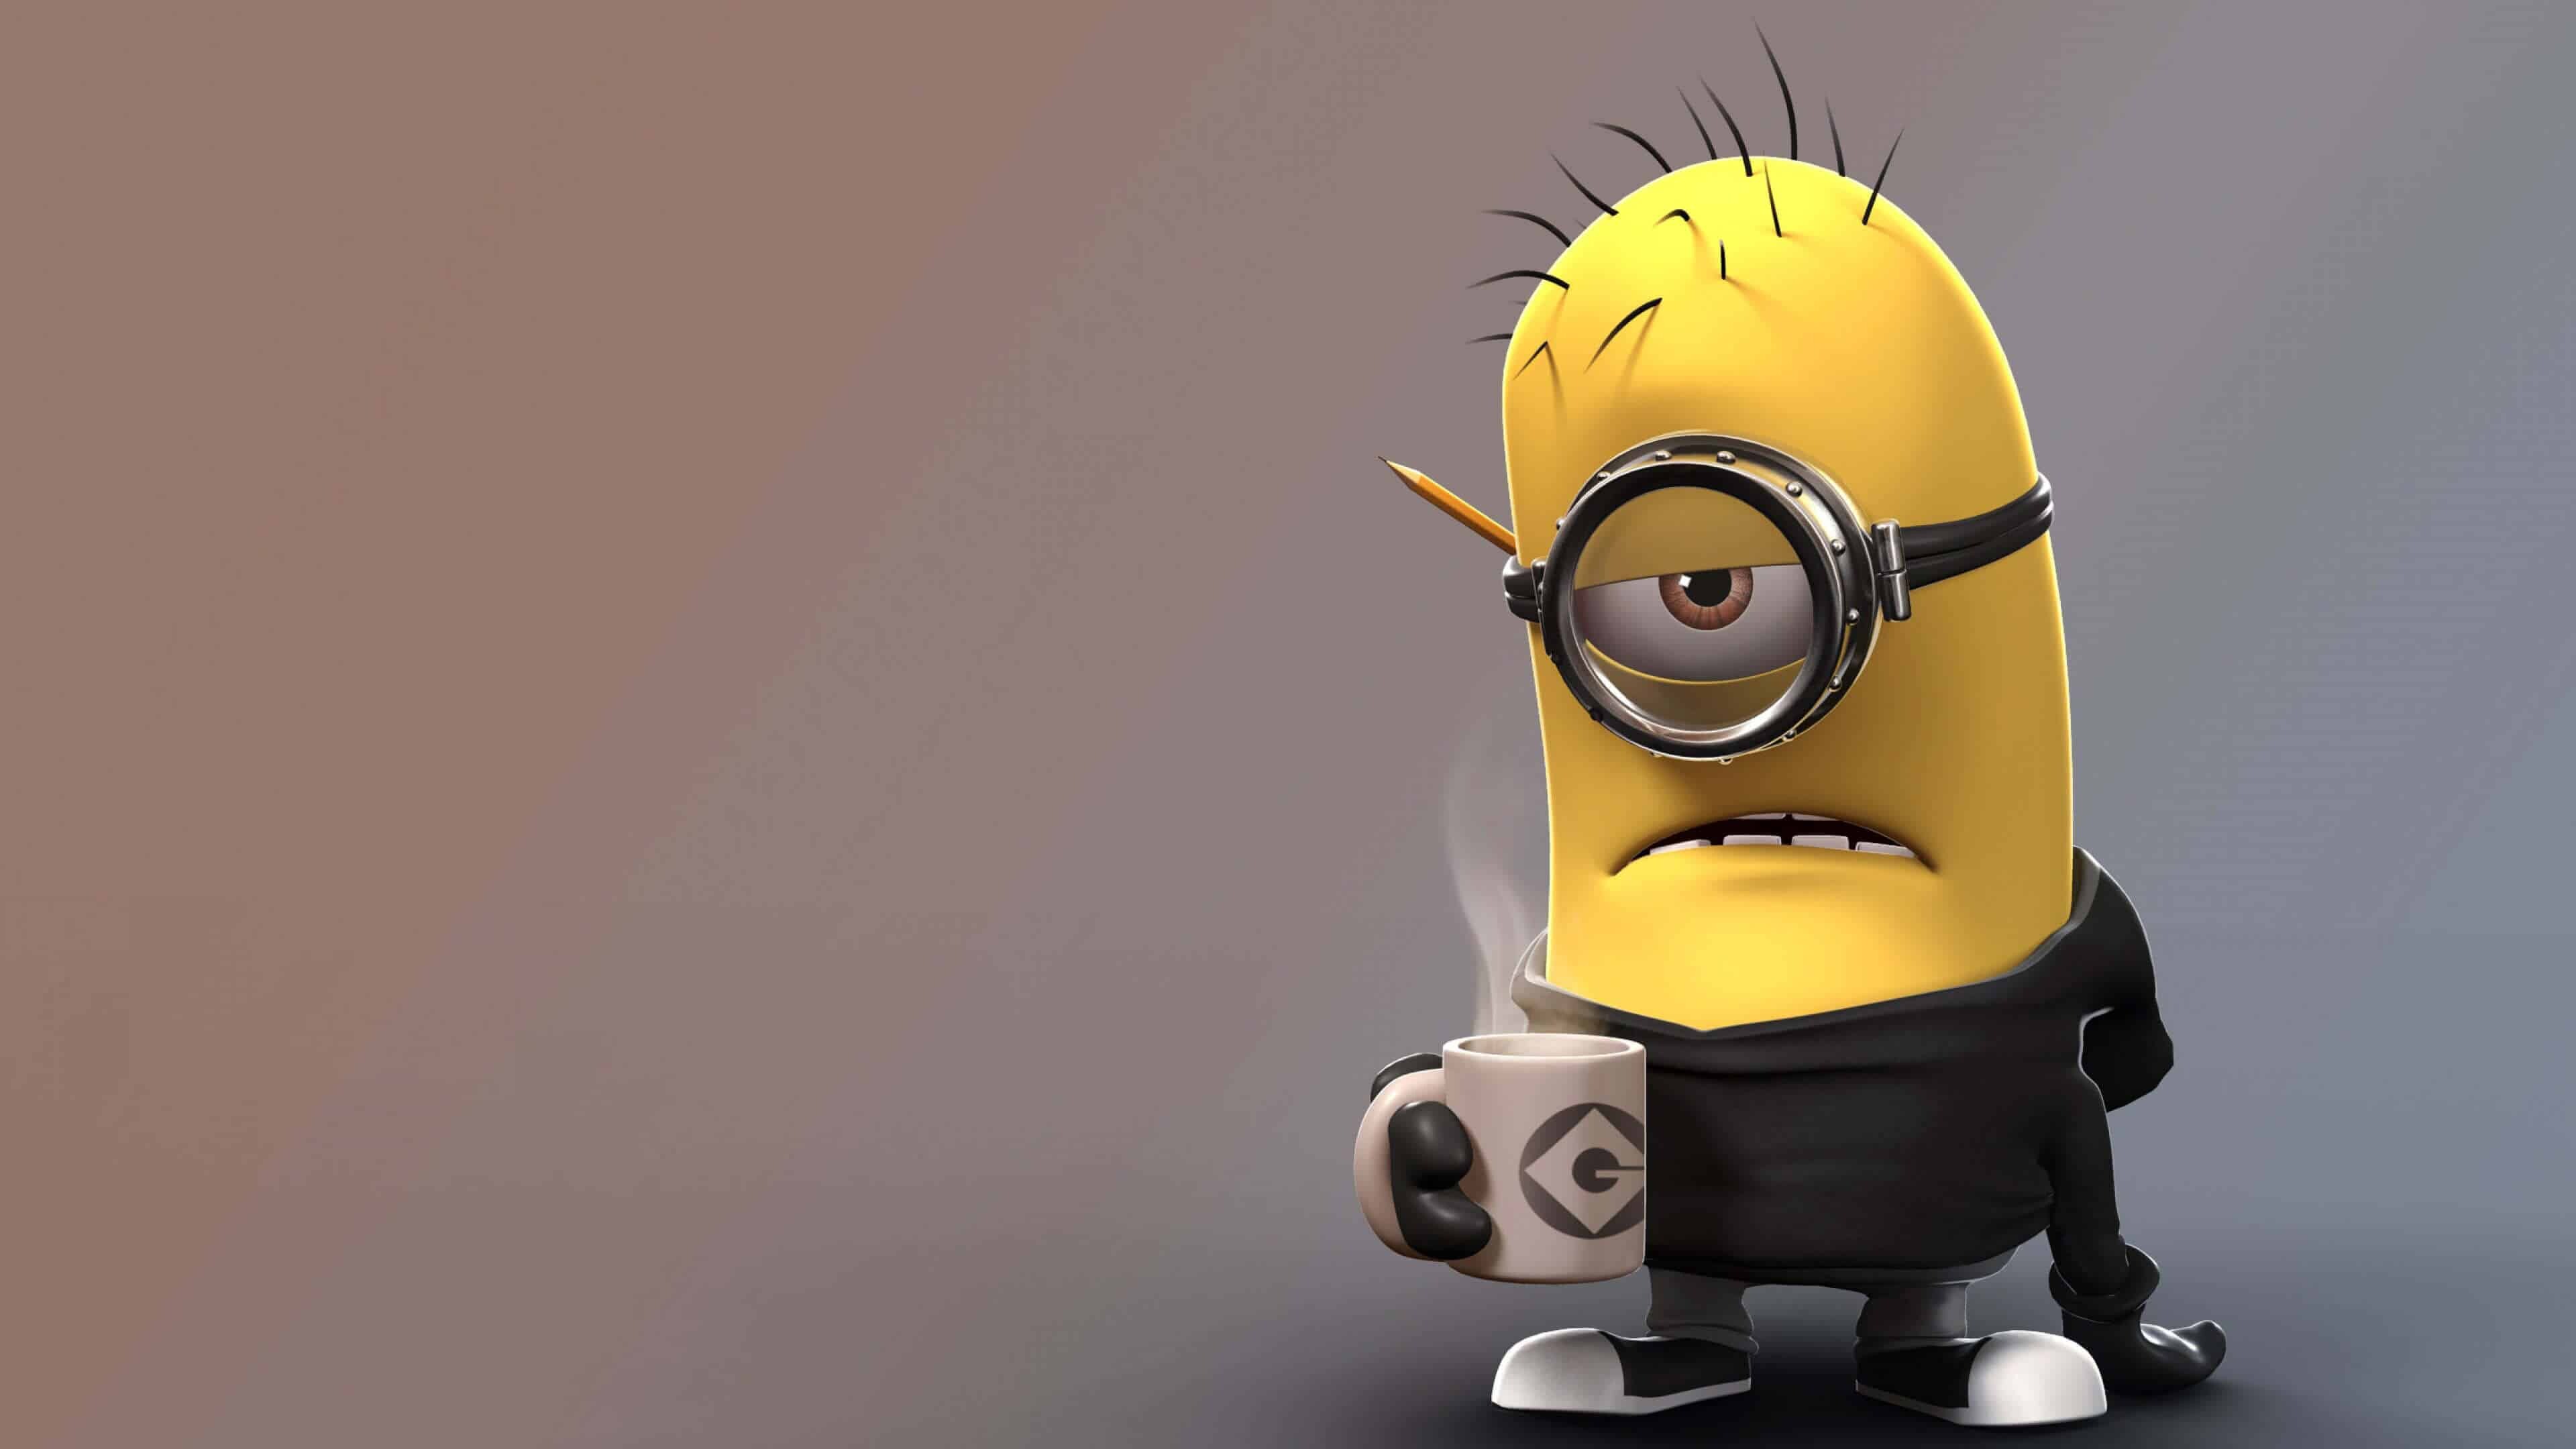 Despicable Me: Minion, A computer-animated media franchise centering on Gru. 3840x2160 4K Wallpaper.